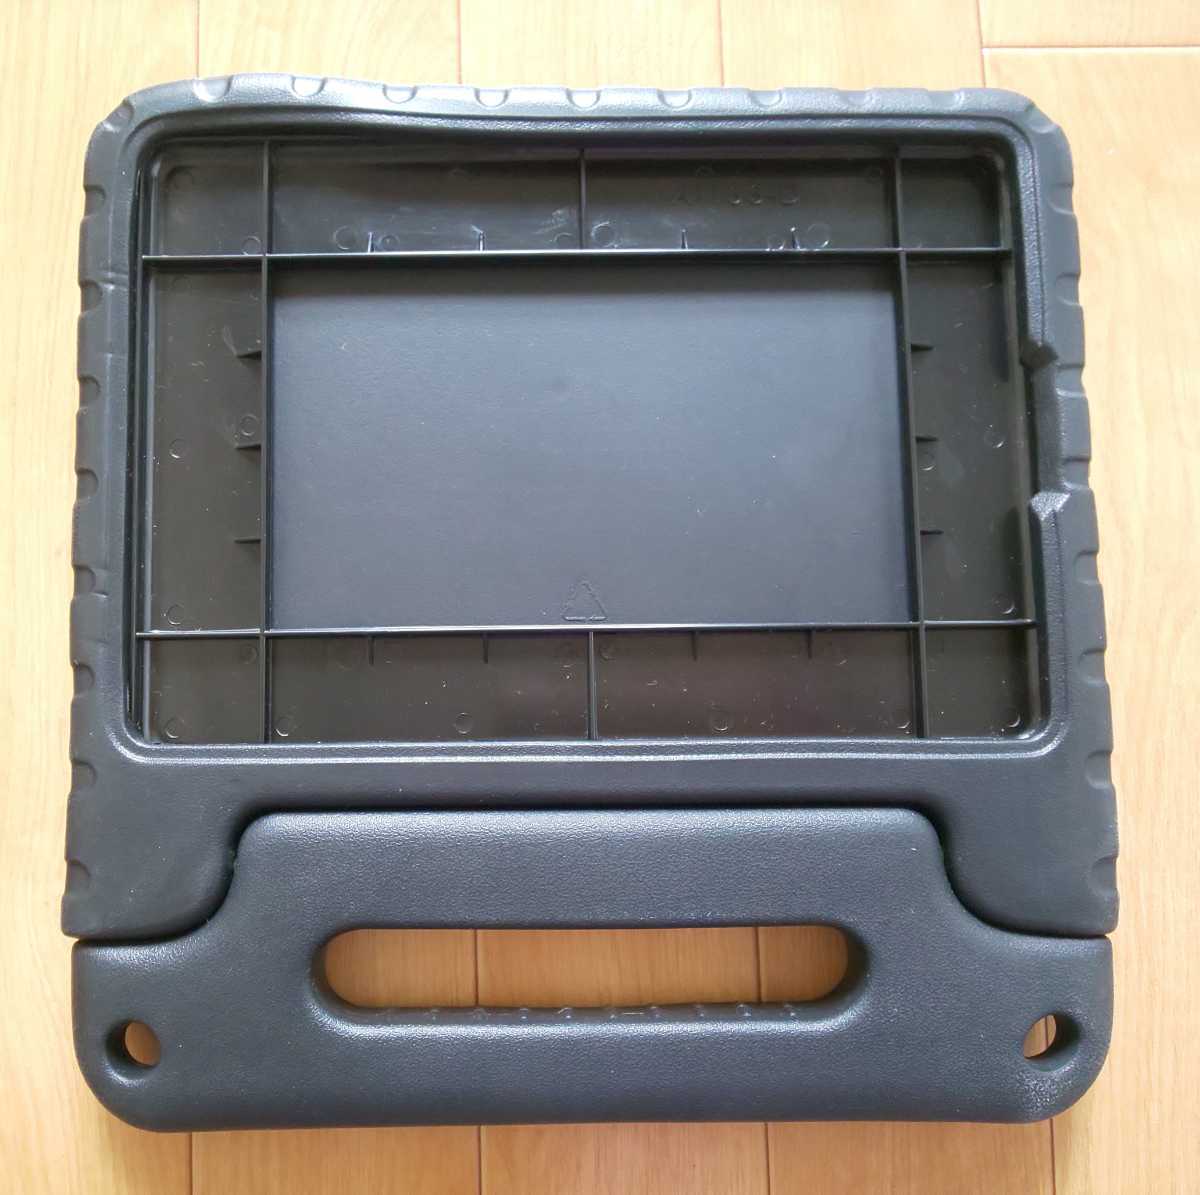 COOPER CASES DYNAMO◆タブレット カバー ケース◆RUGGED&TUOGH HEAVY DUTY PROTECTIVE CASE◆未使用品_画像4